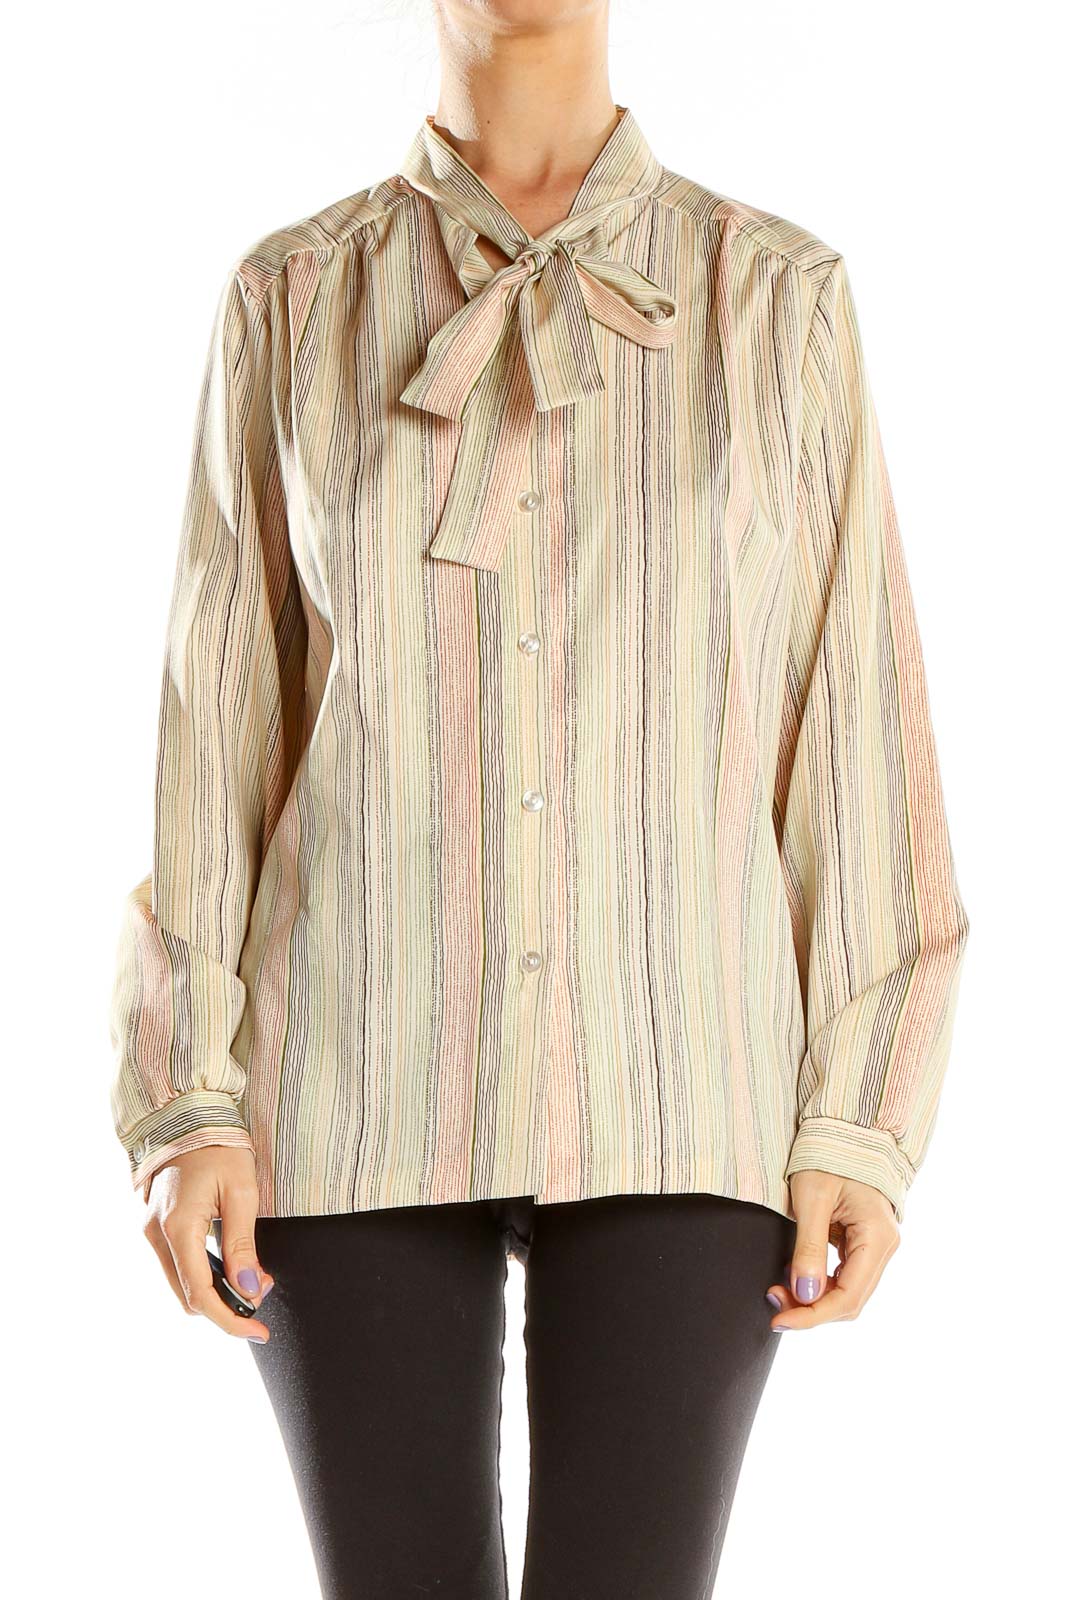 Multicolor Vintage Striped Button Up Shirt With Neck Tie Front